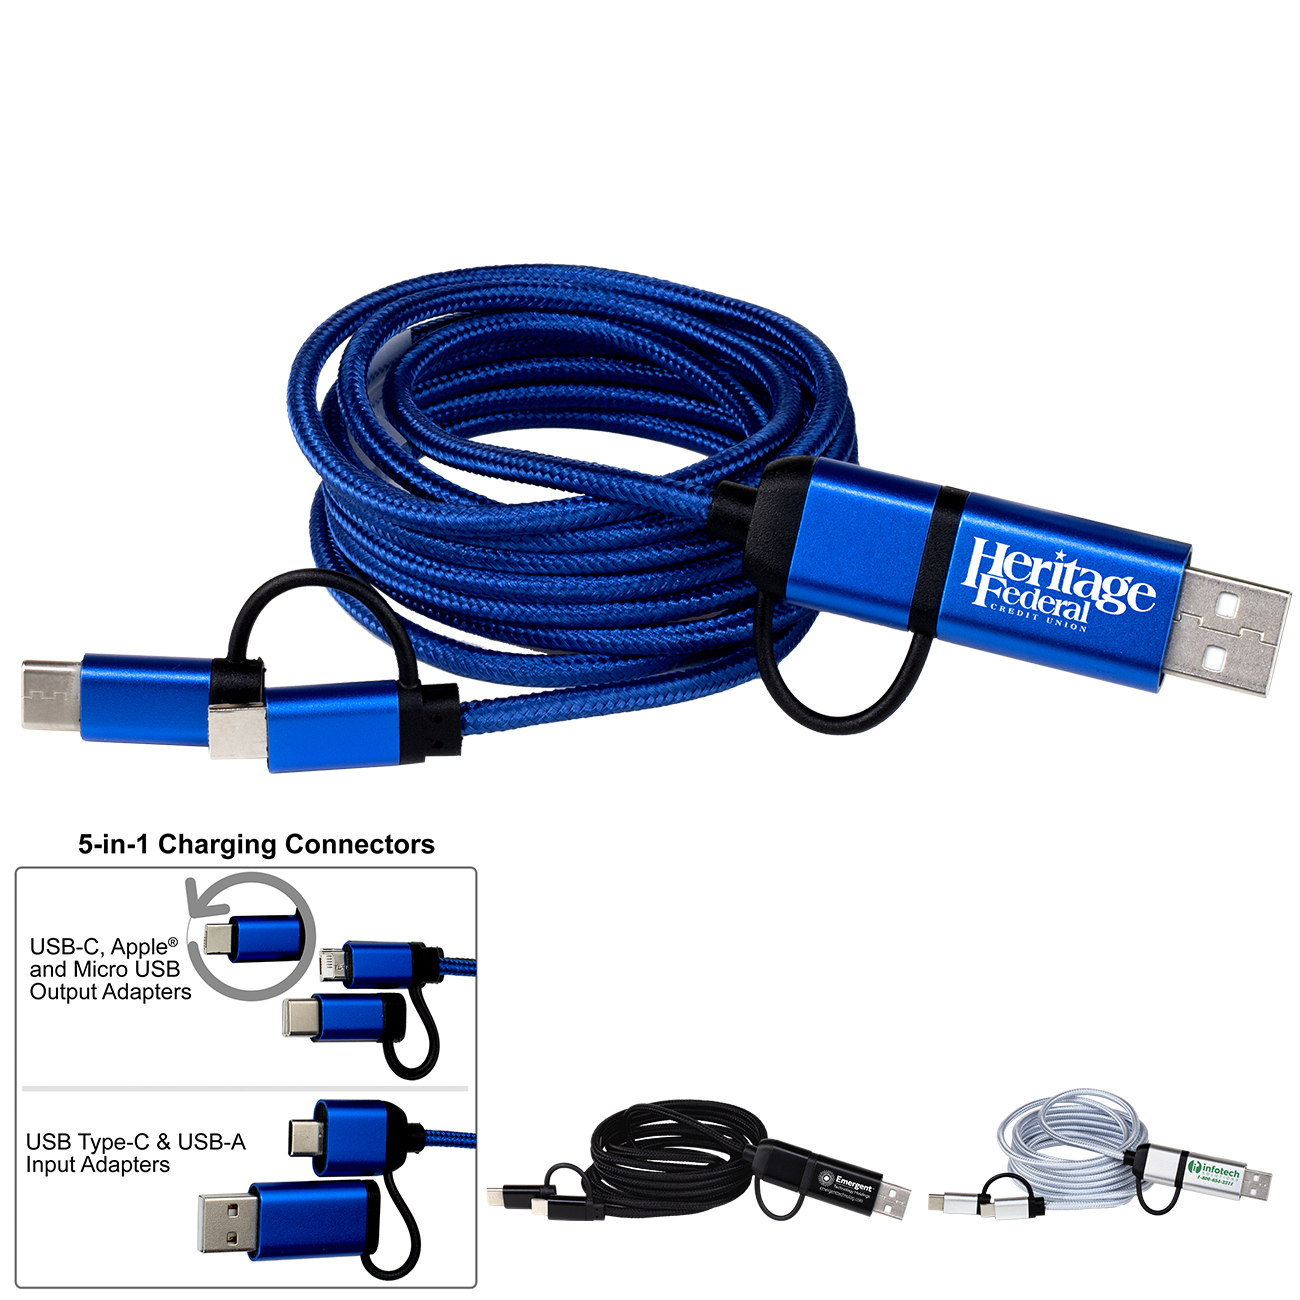 “Oslo” 5-in-1 Braided 6 Ft. Long Charging Cable